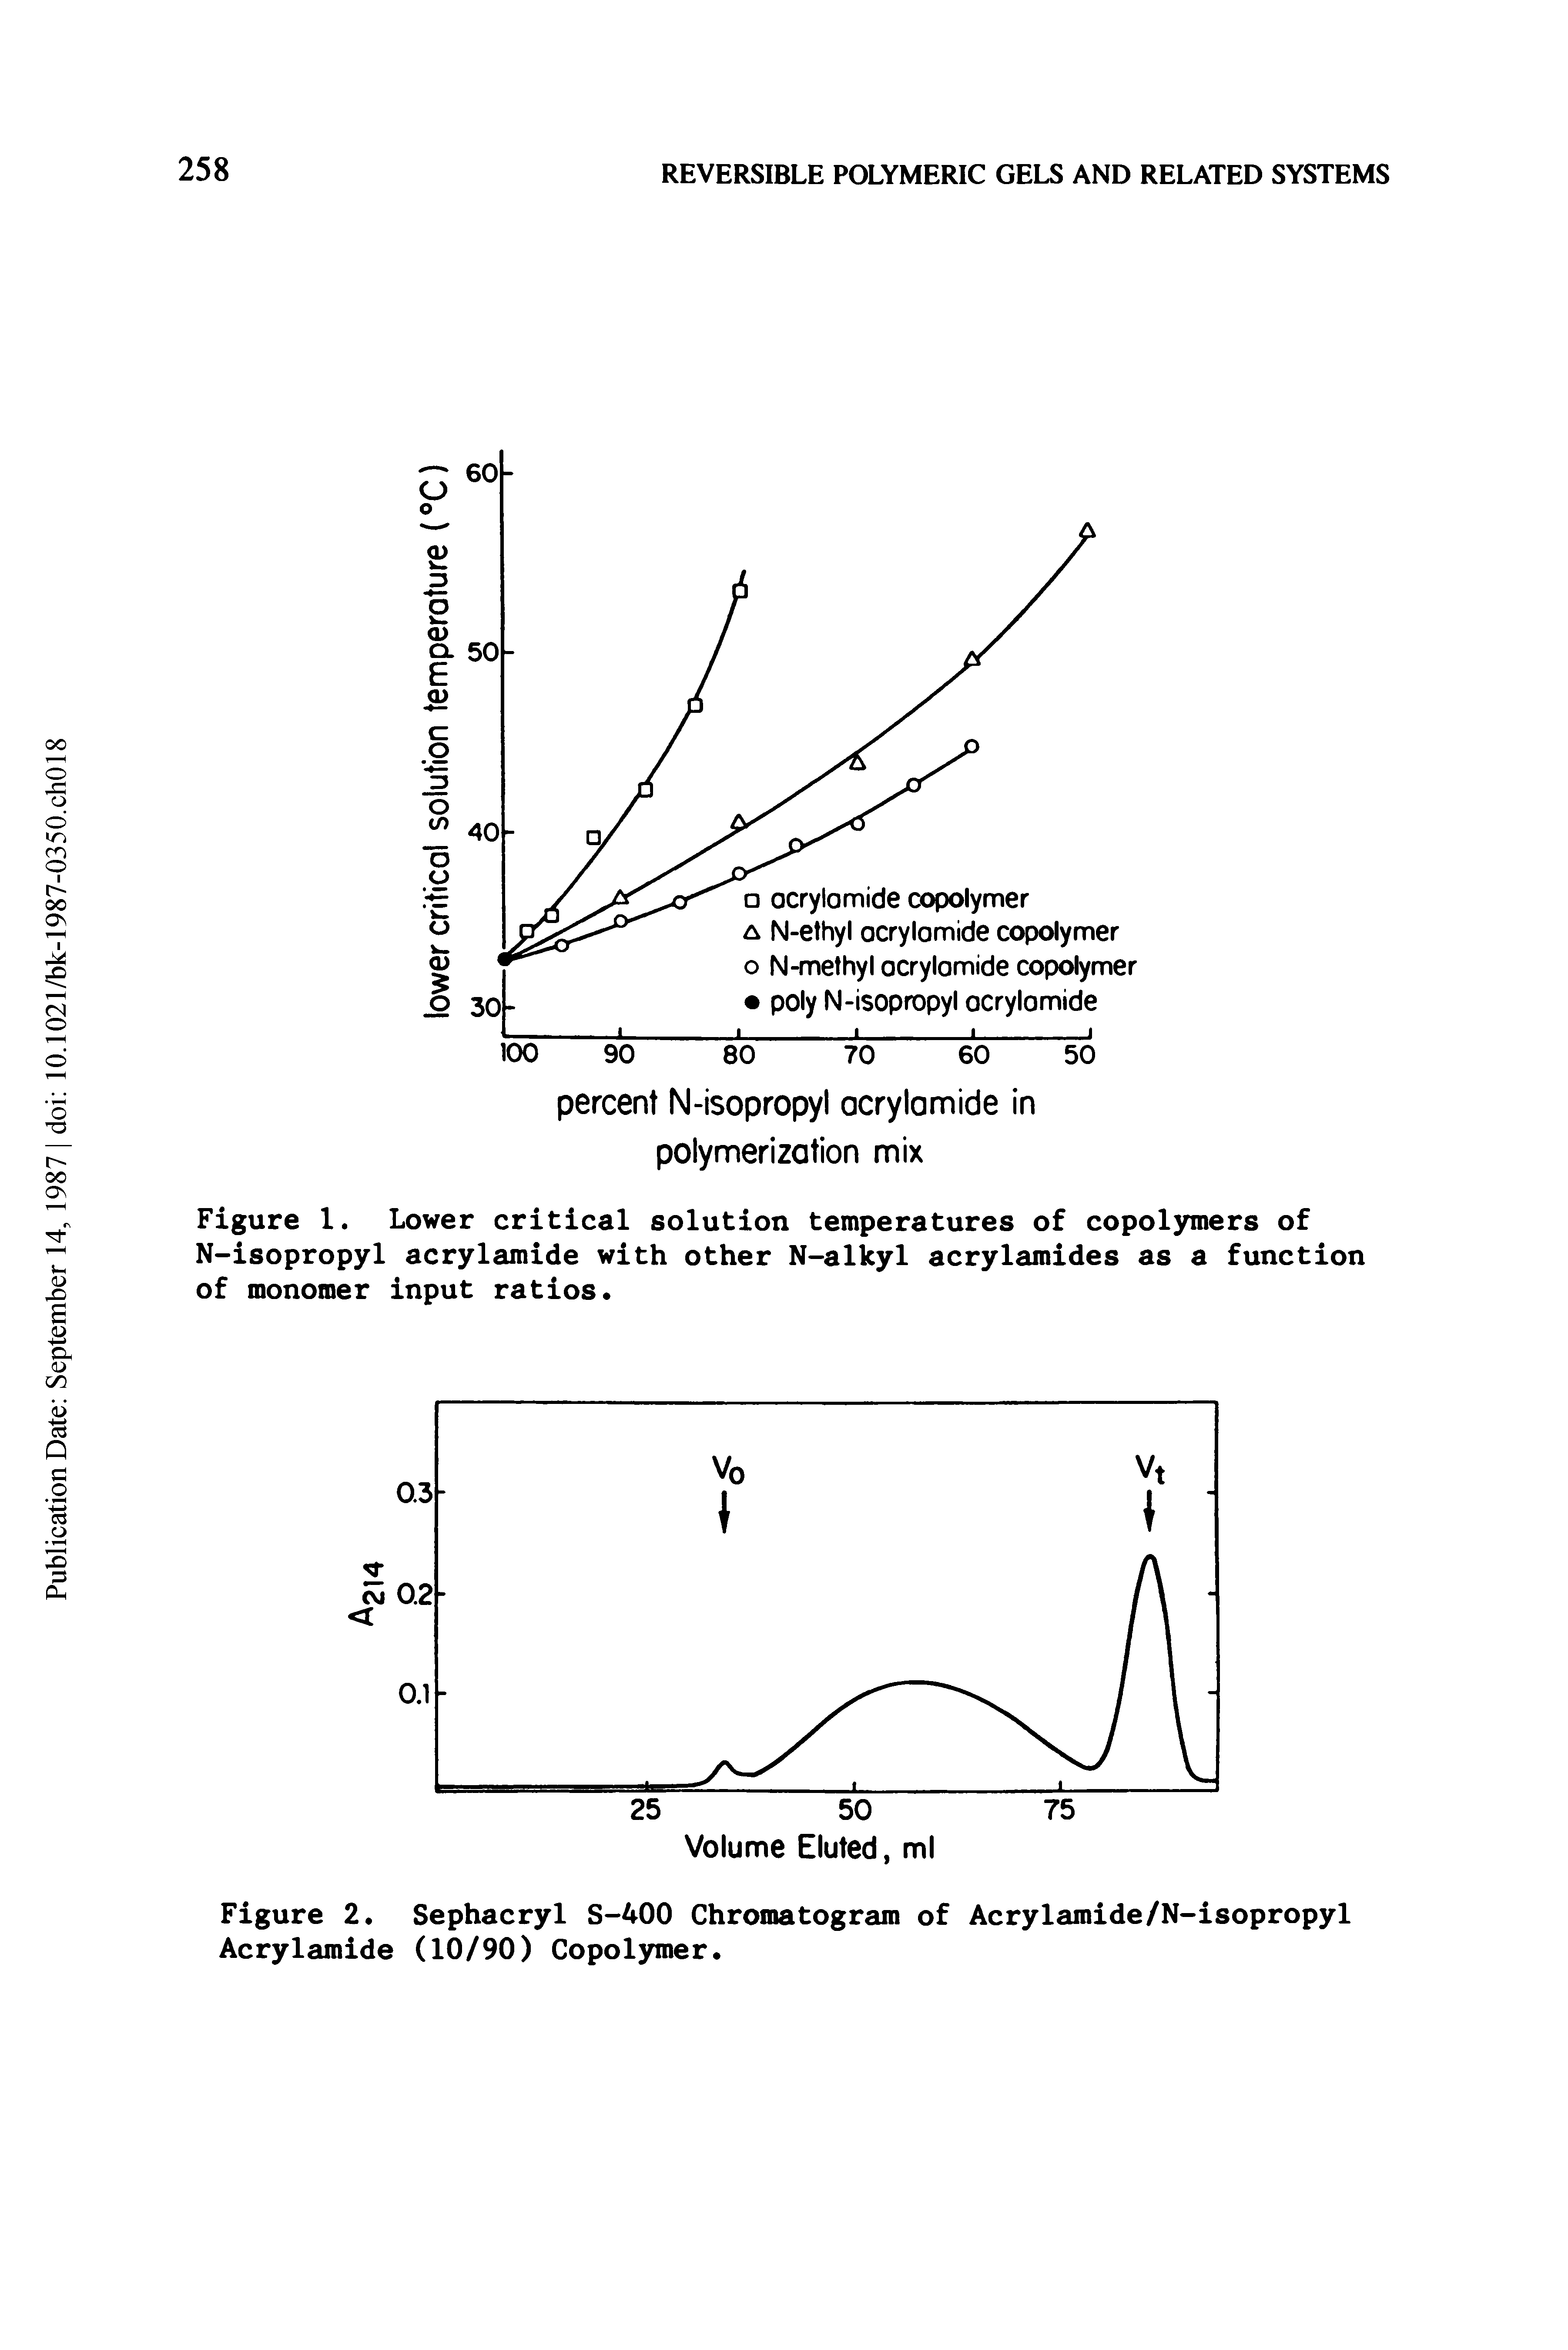 Figure 1. Lower critical solution temperatures of copolymers of N-isopropyl acrylamide with other N-alkyl acrylamides as a function of monomer input ratios.